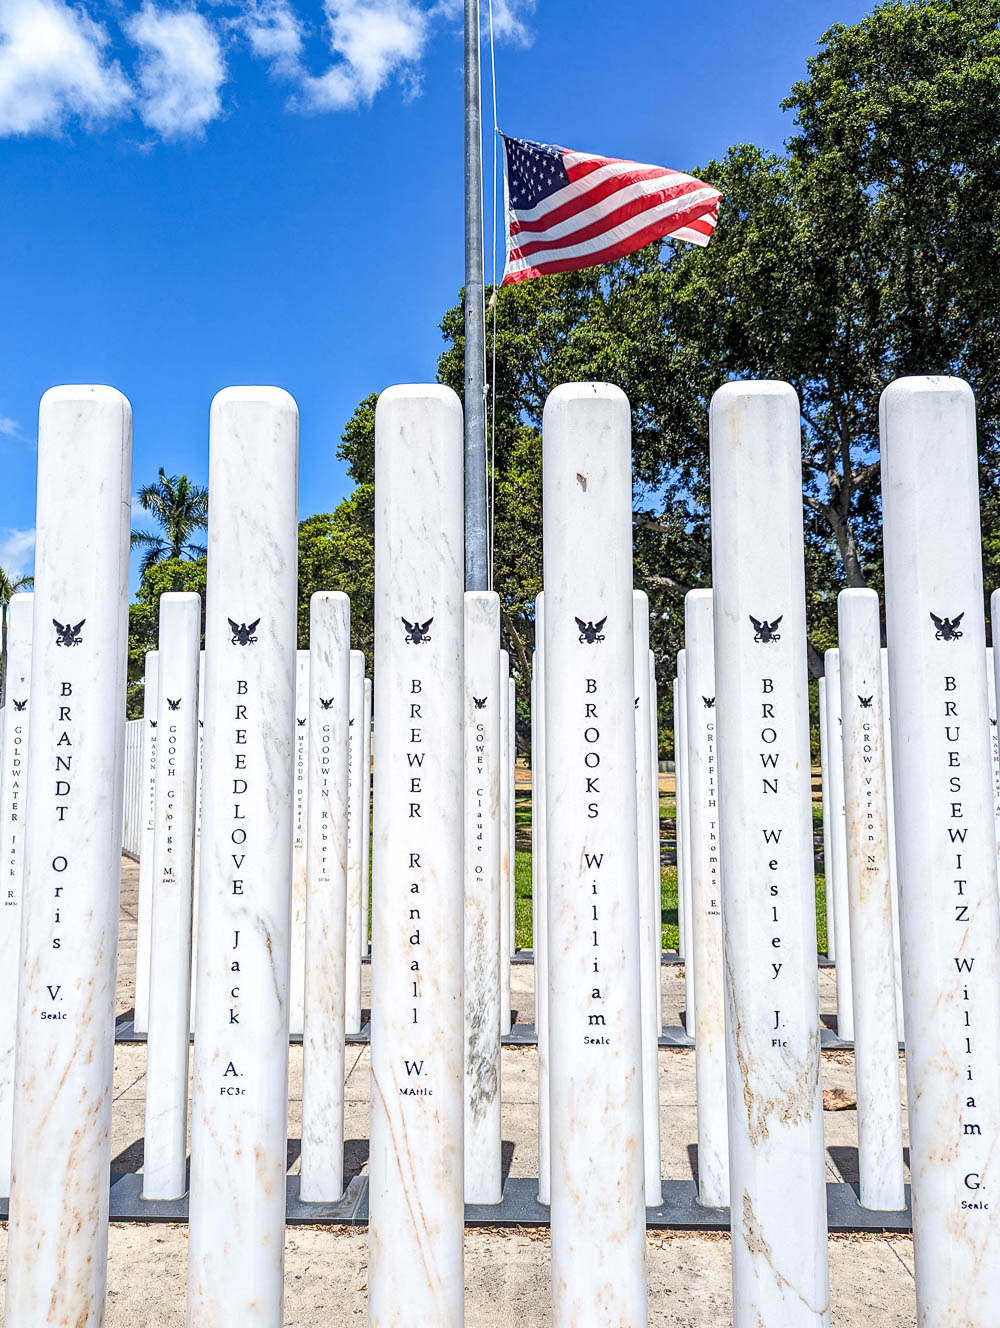 white pillars with names on them in front of an american flag on a pole